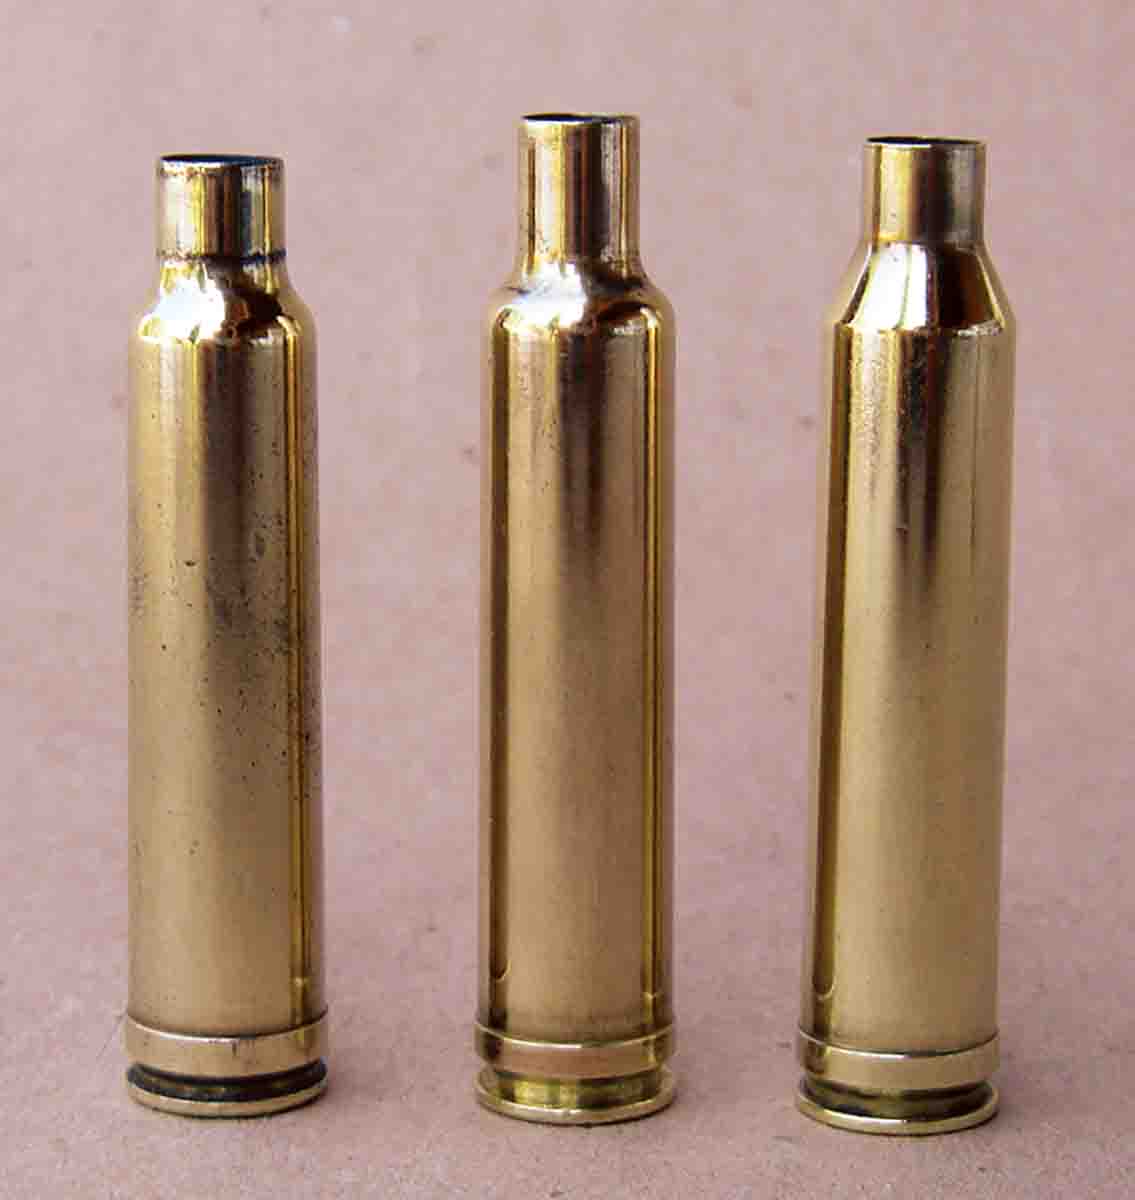 Interest in 7mm magnums began to grow with U.S. shooters during and after World War II. From left: The 7x61 Sharpe and Hart “Super” was introduced in 1953, the 7mm Weatherby Magnum was introduced around 1943/1944 and the 7mm Remington Magnum was introduced in 1963.